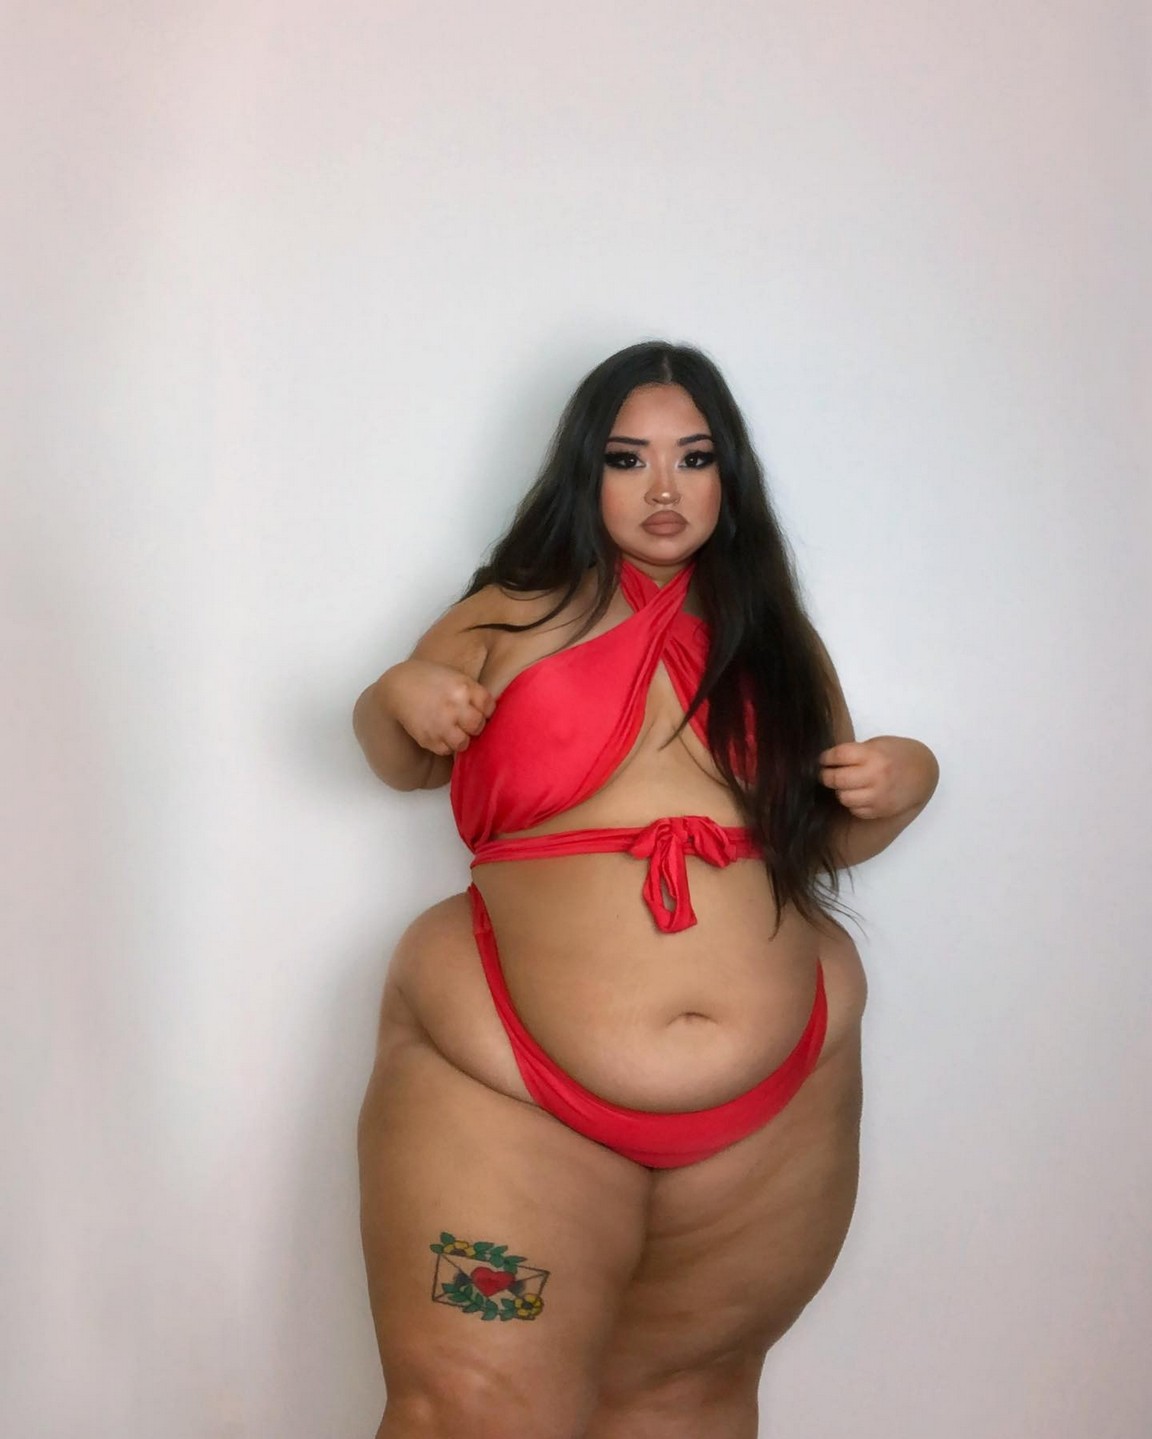 Erika Lipps Sexy In Lingerie TheFappening.Pro 7 - Erika Lipps Real Jabba Girl (29 Photos)